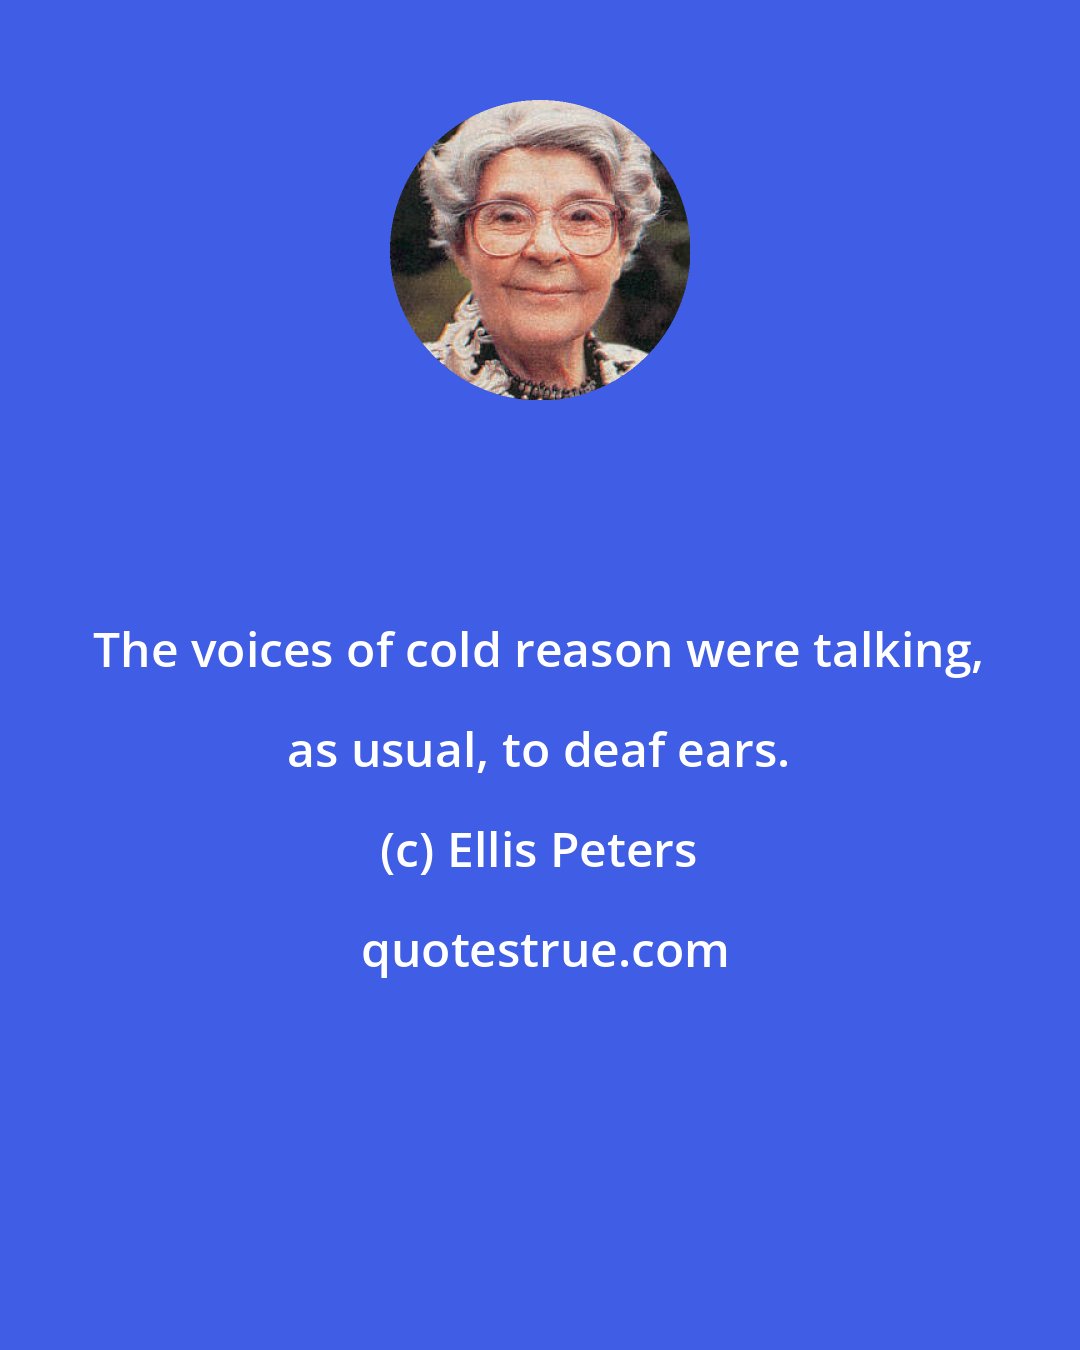 Ellis Peters: The voices of cold reason were talking, as usual, to deaf ears.